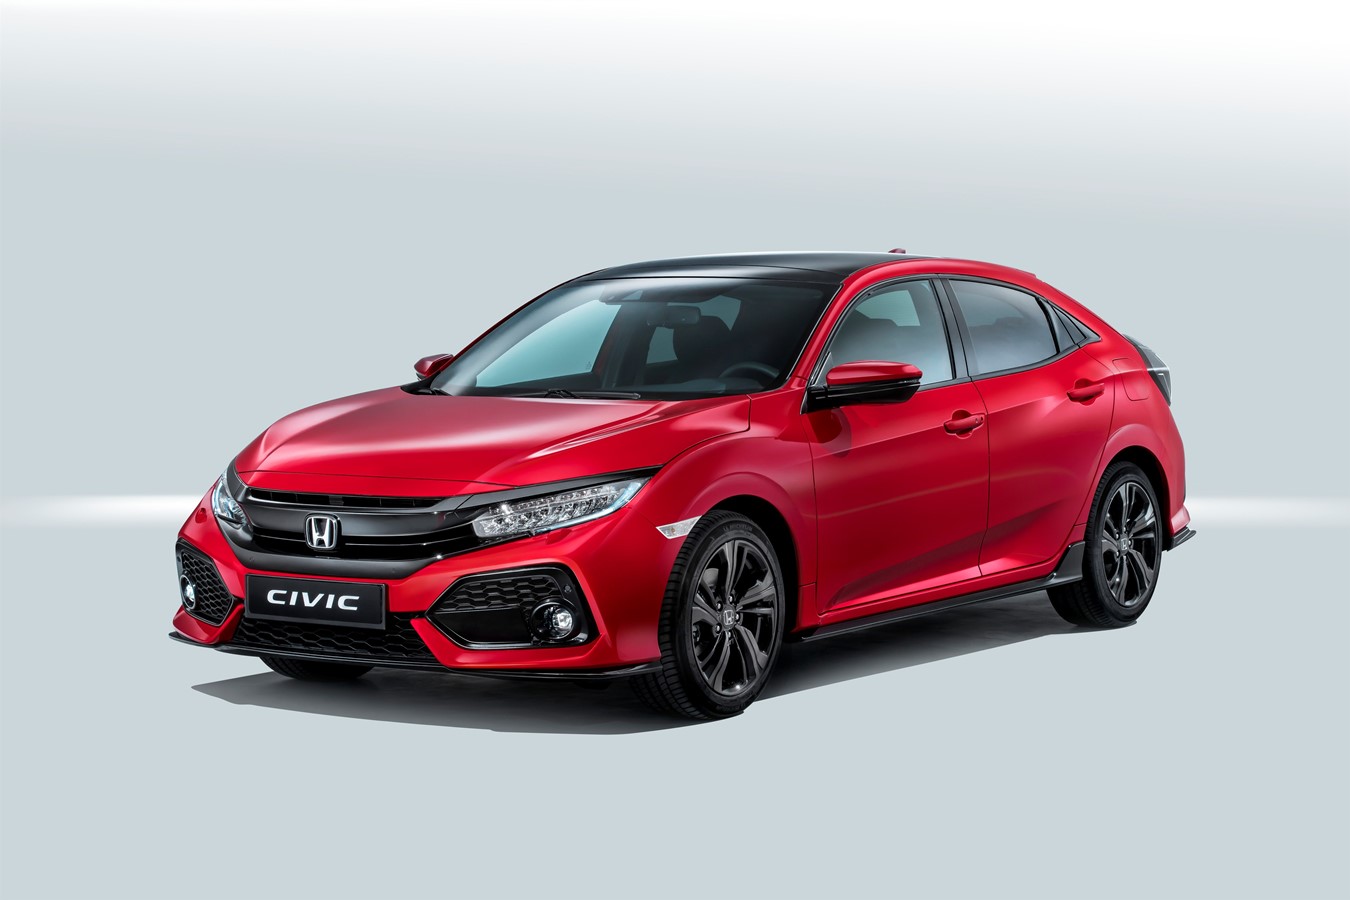 Residual Values and Pricing Announced for All-New Honda Civic